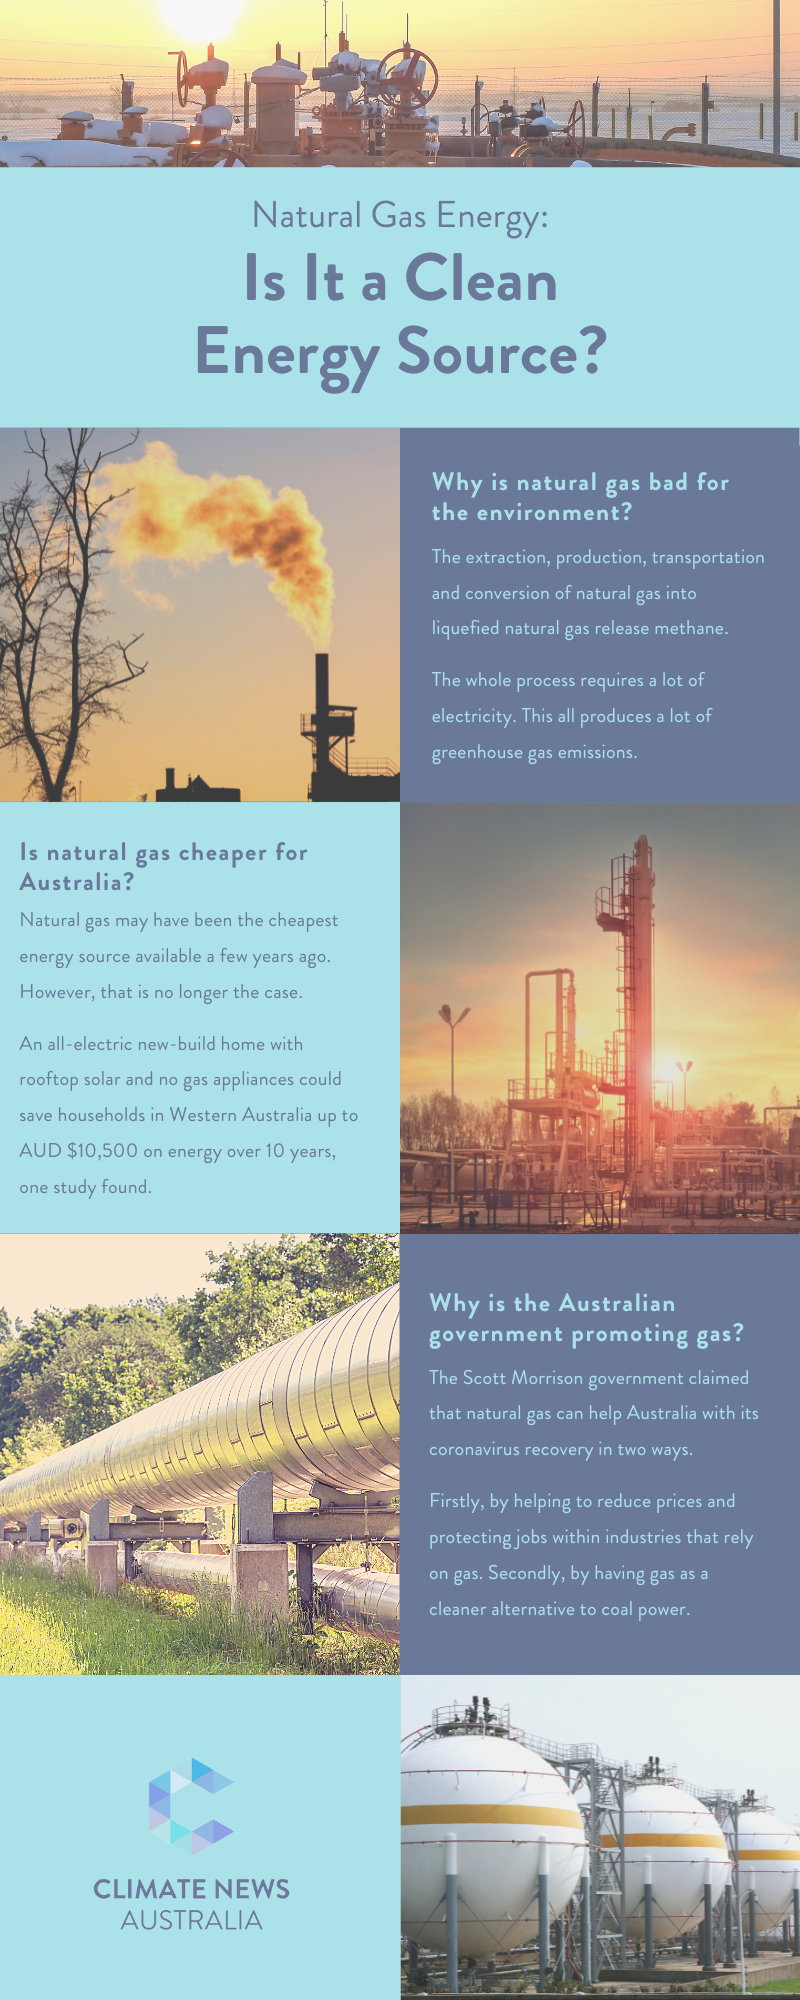 Infographic about natural gas energy